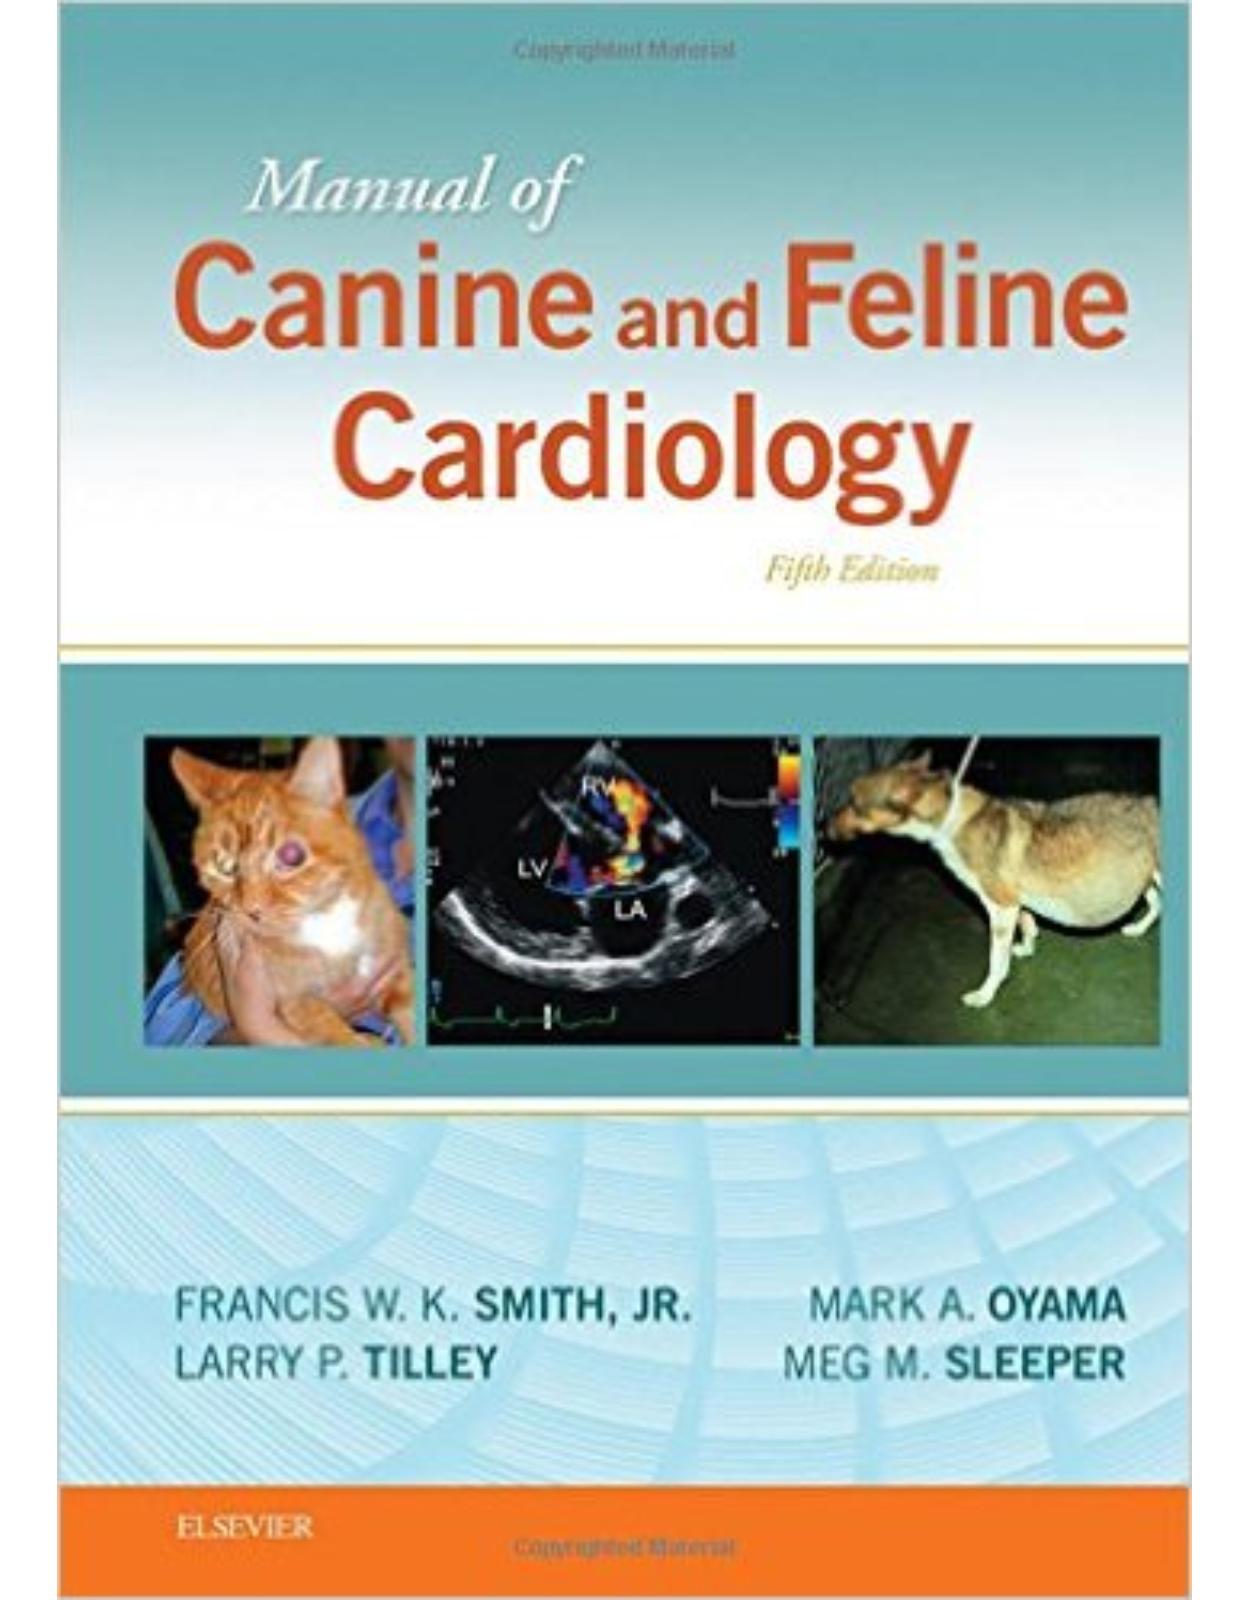 Manual of Canine and Feline Cardiology, 5e 5th Edition